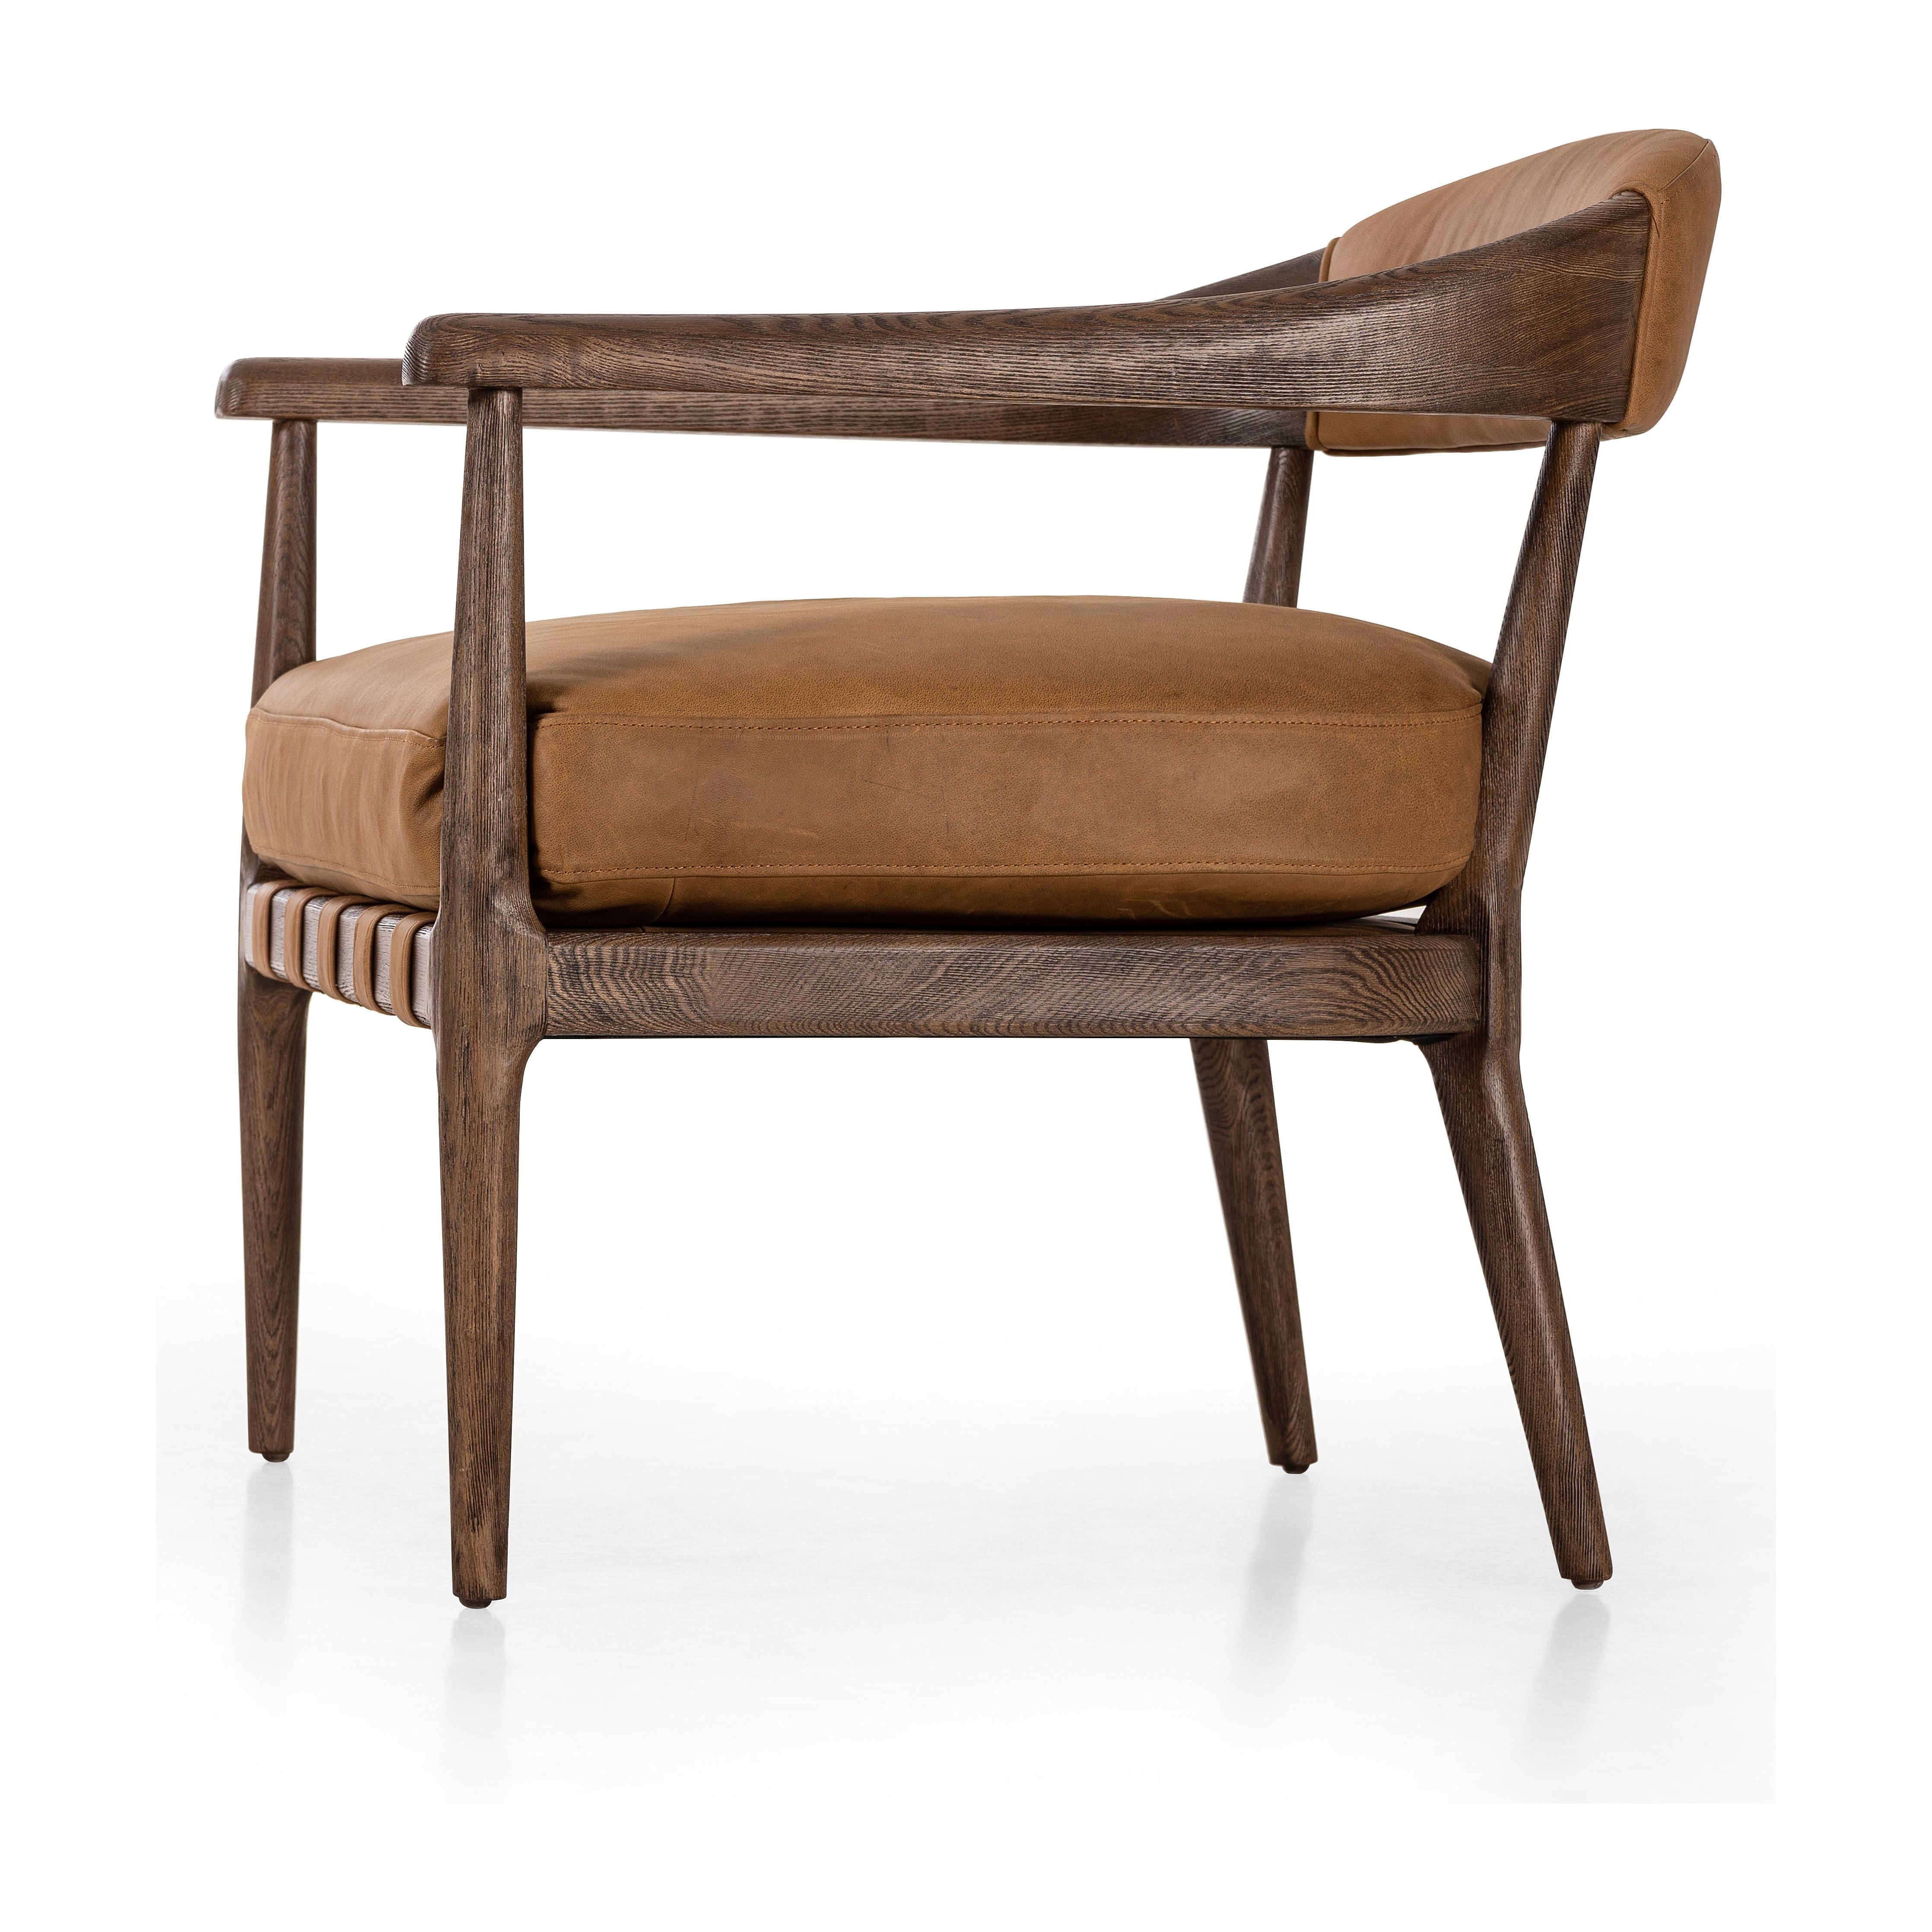 Safari styling is brought to modern speed on this vintage-inspired chair. Its solid wood frame features a webbed seating structure that brings a sink-in feel to the entire piece. The upholstered back, strap details and loose cushion are finished in carbon neutral, vegetable-tanned leather processed using naturally fallen eucalyptus leaves in Uruguay. Amethyst Home provides interior design, new construction, custom furniture, and area rugs in the Salt Lake City metro area.